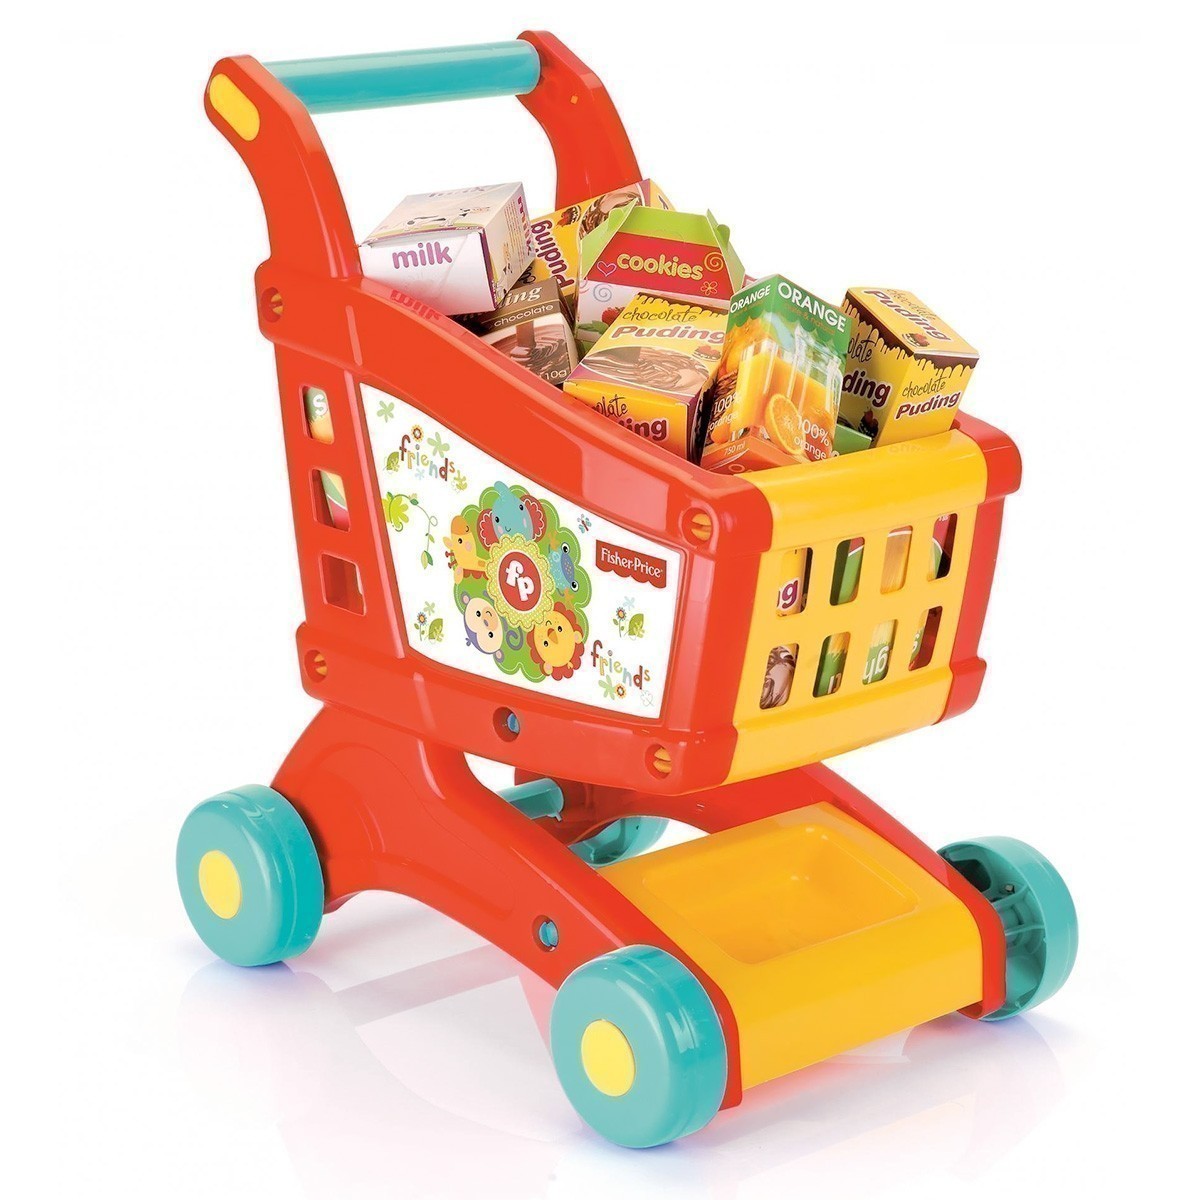 Fisher Price™ - Shopping Cart & Accessories